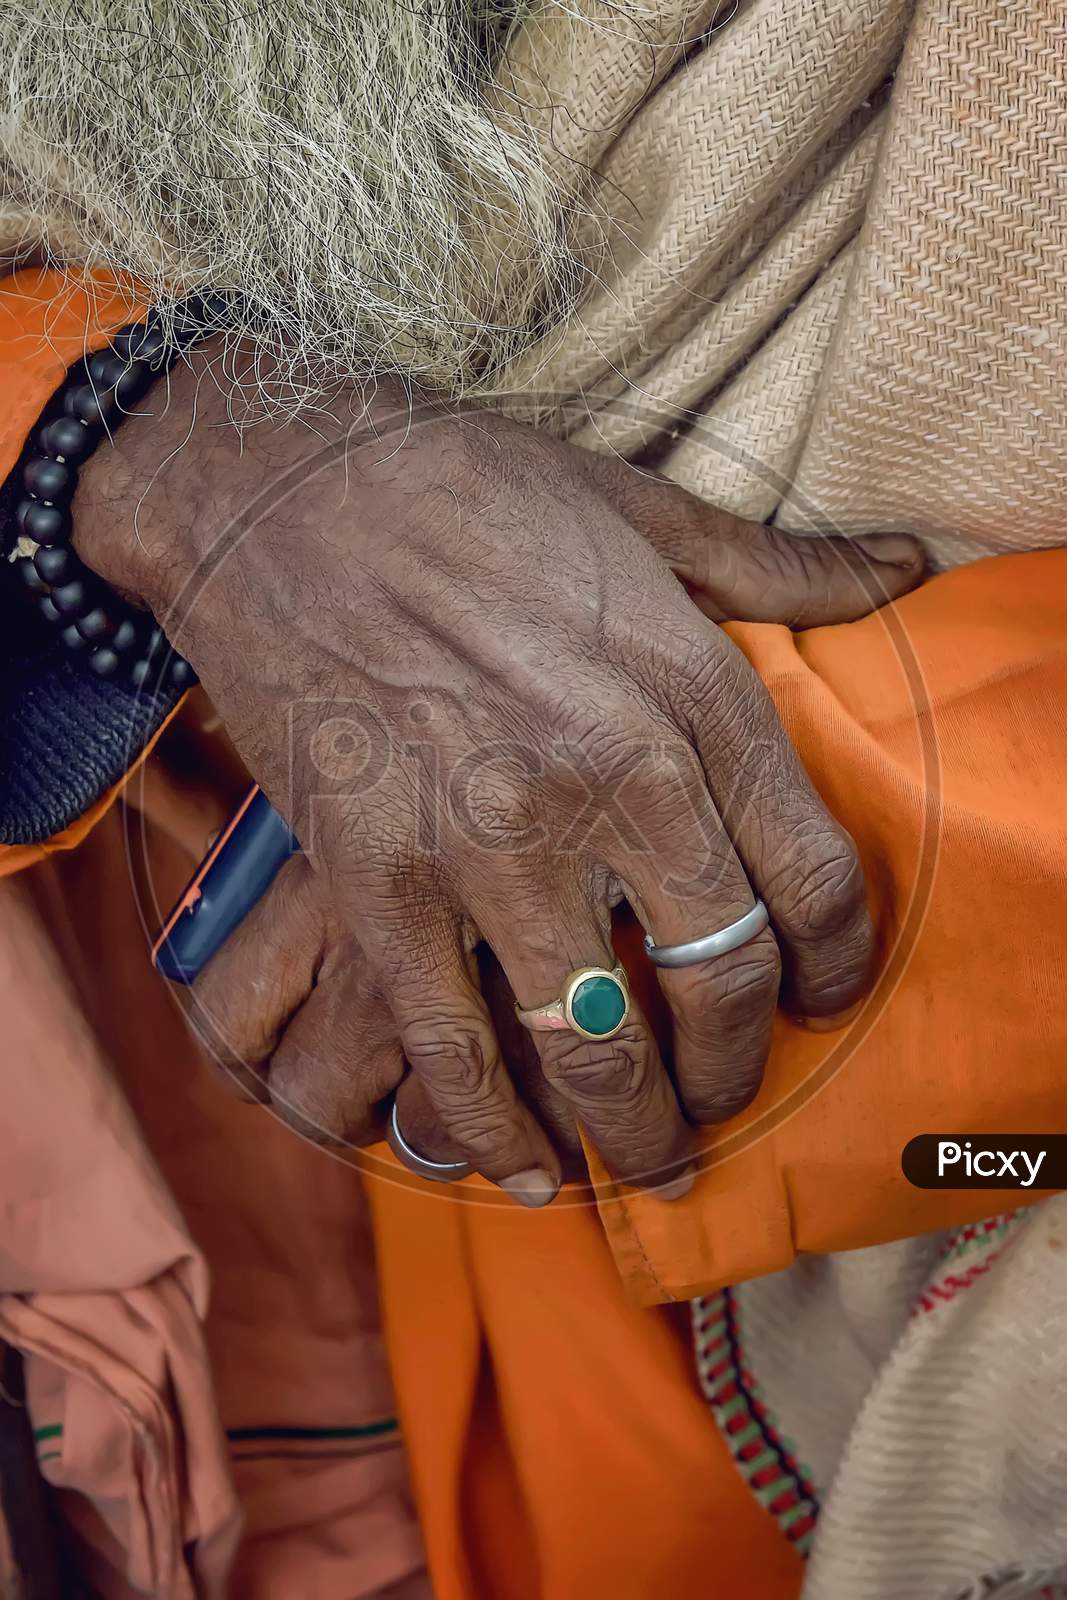 The old hands of a sadhu - holy man of India seen on the sidewalk in Varanasi.